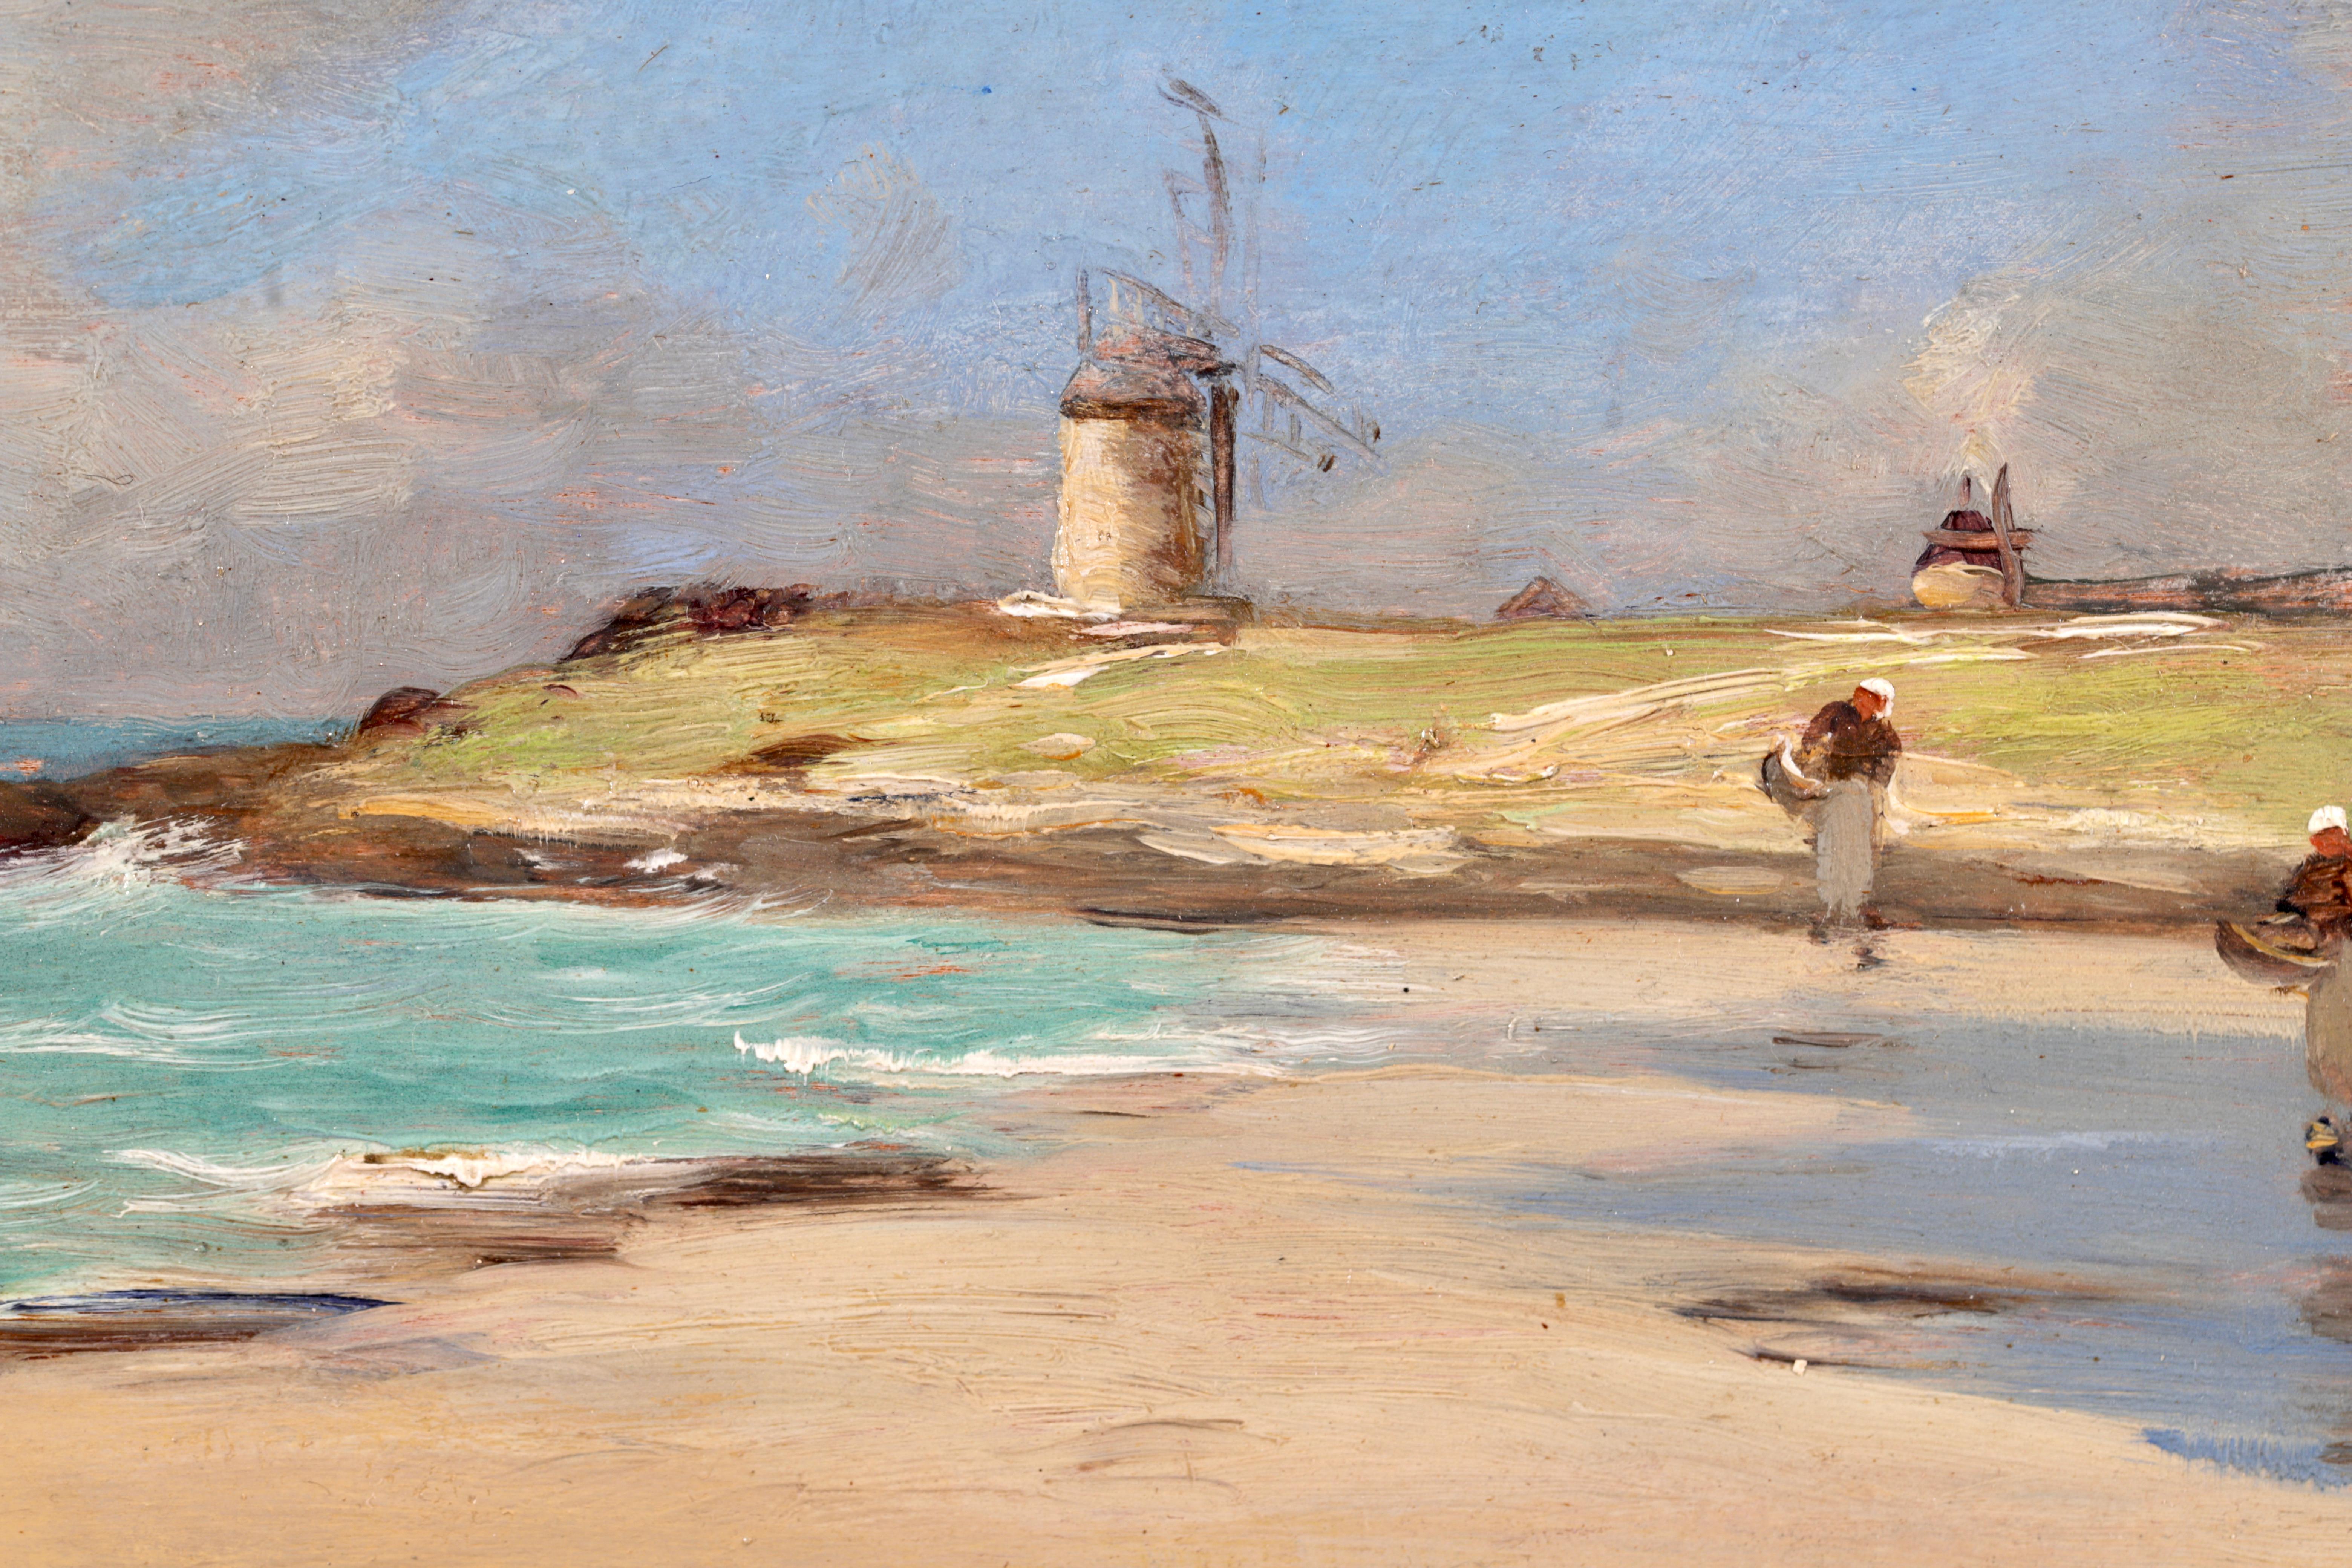 Signed coastal landscape oil on panel circa 1890 by French impressionist painter Jean Baptiste Antoine Guillemet. The piece depicts several women in traditional dress walking across the sand by the coast with windmills in the